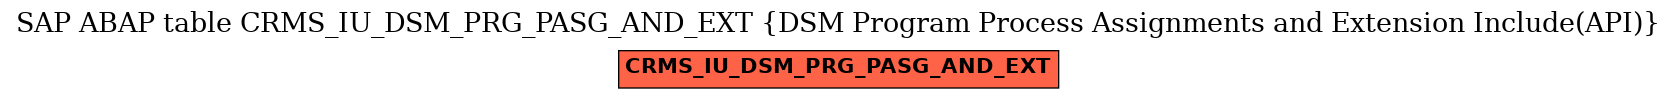 E-R Diagram for table CRMS_IU_DSM_PRG_PASG_AND_EXT (DSM Program Process Assignments and Extension Include(API))